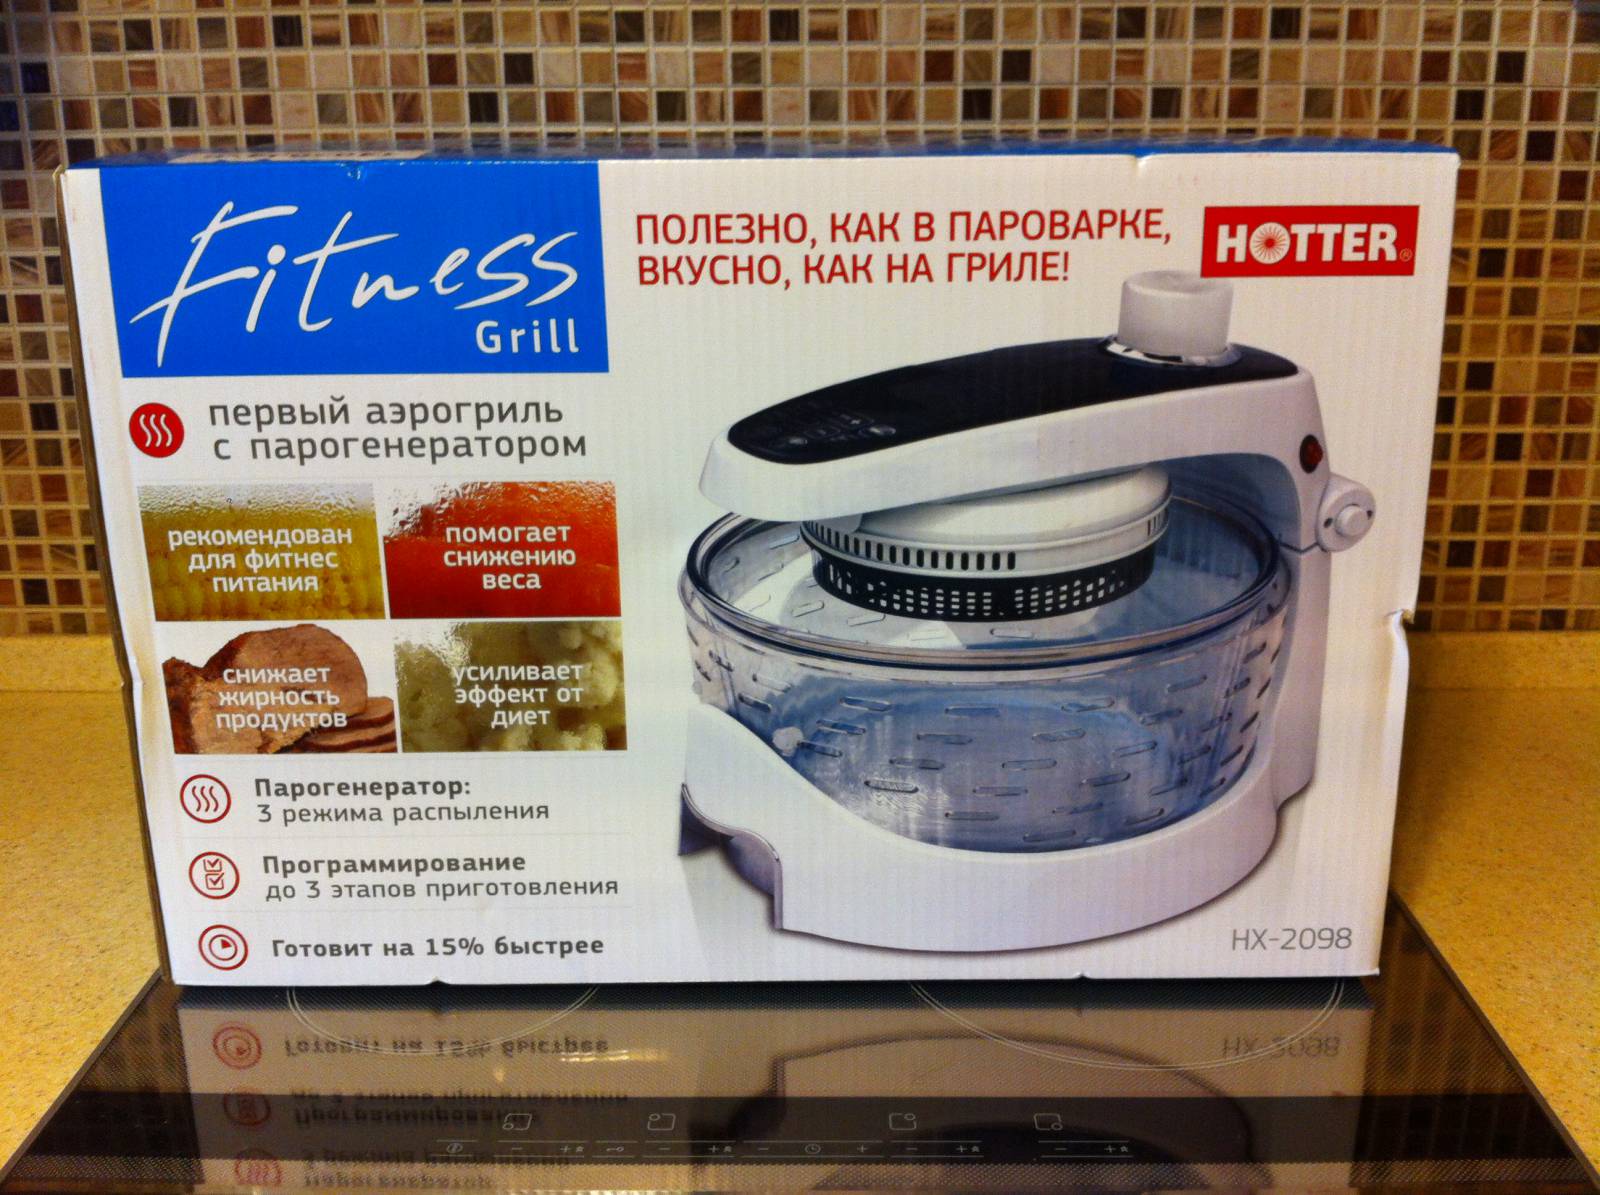 Fitness grill Hotter with steam generator